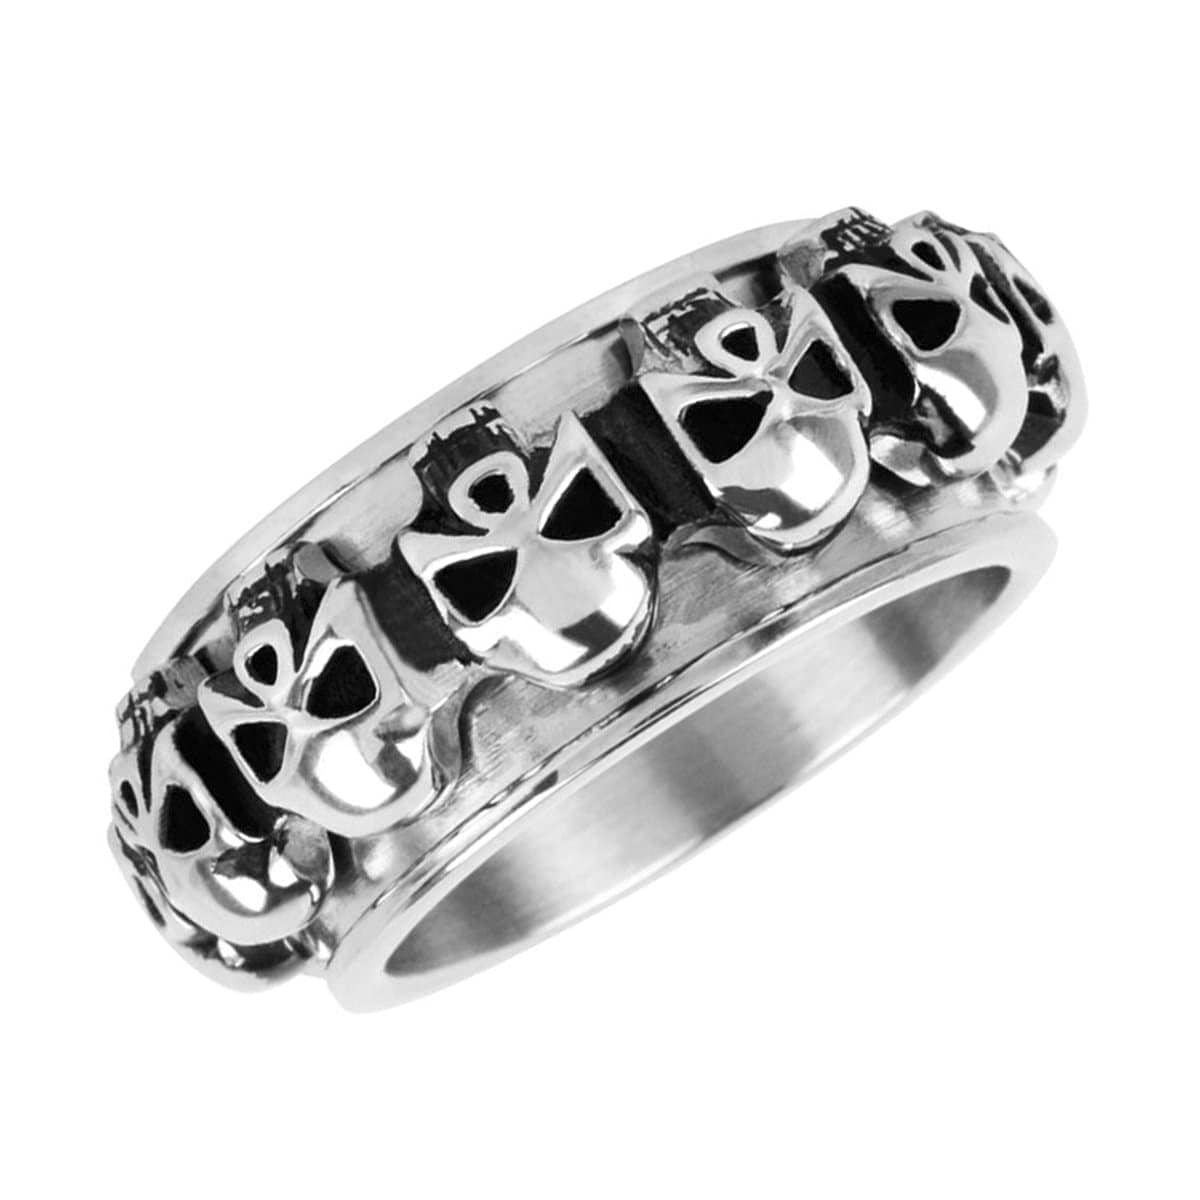 INOX JEWELRY Rings Silver Tone Stainless Steel All-Around Skull Spinner Ring